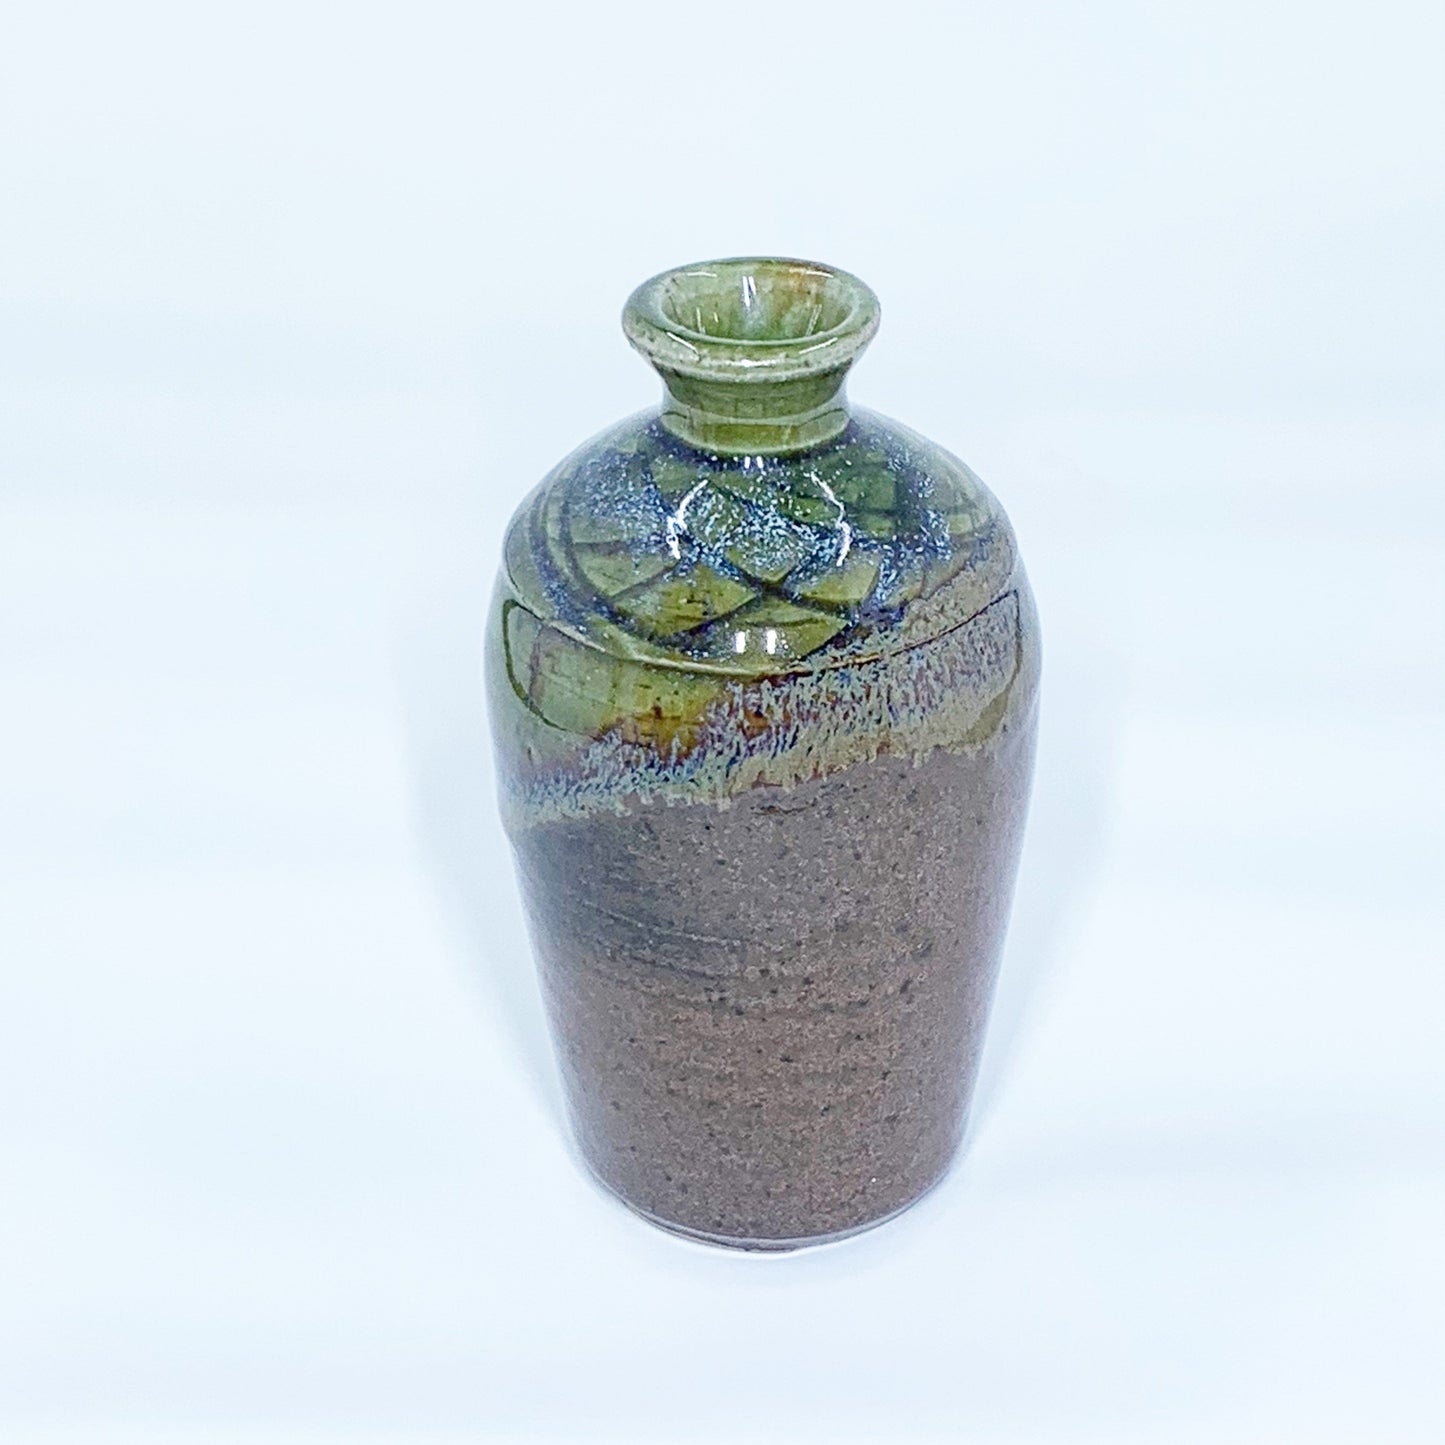 Vintage Glazed Pottery Bud Vase | Small Handmade Vase | Brown and Green Pottery